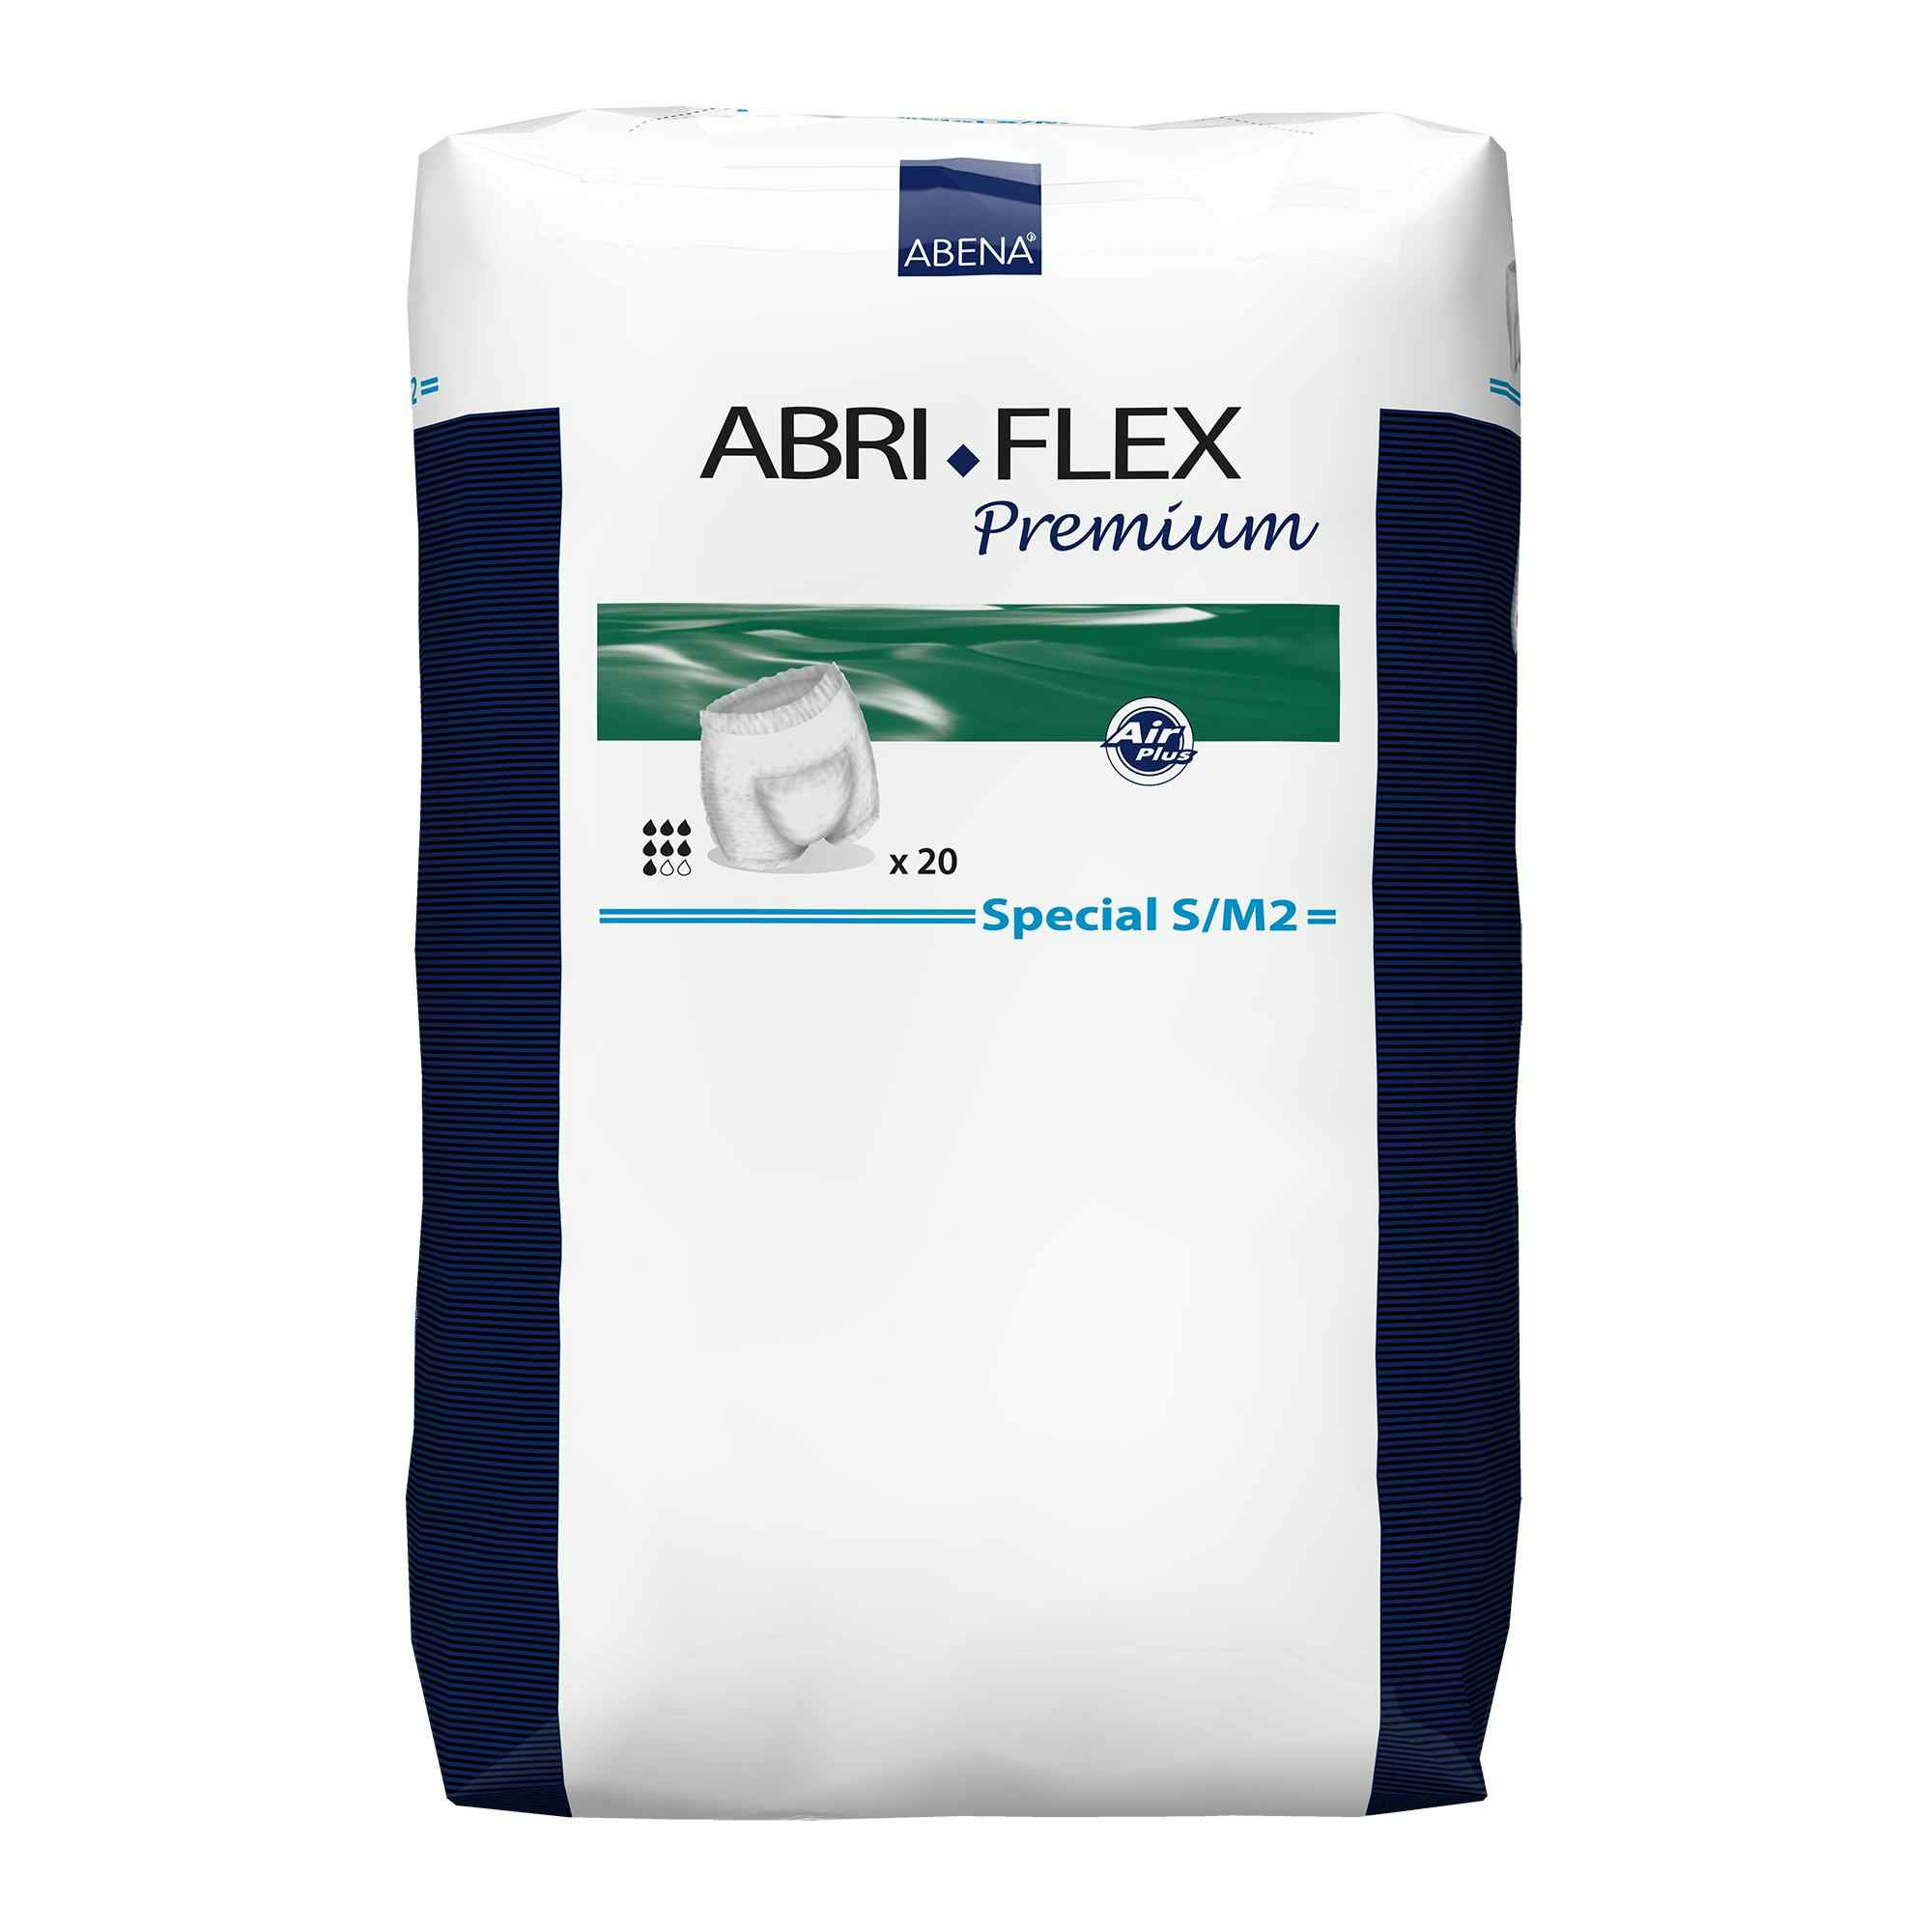 Abri-Flex Special Unisex Adult  Disposable Pull On Diaper with Tear Away Seams, Moderate Absorbency, 41073, Small/Medium (24-43") - Case of 120 Diapers (6 Bags)